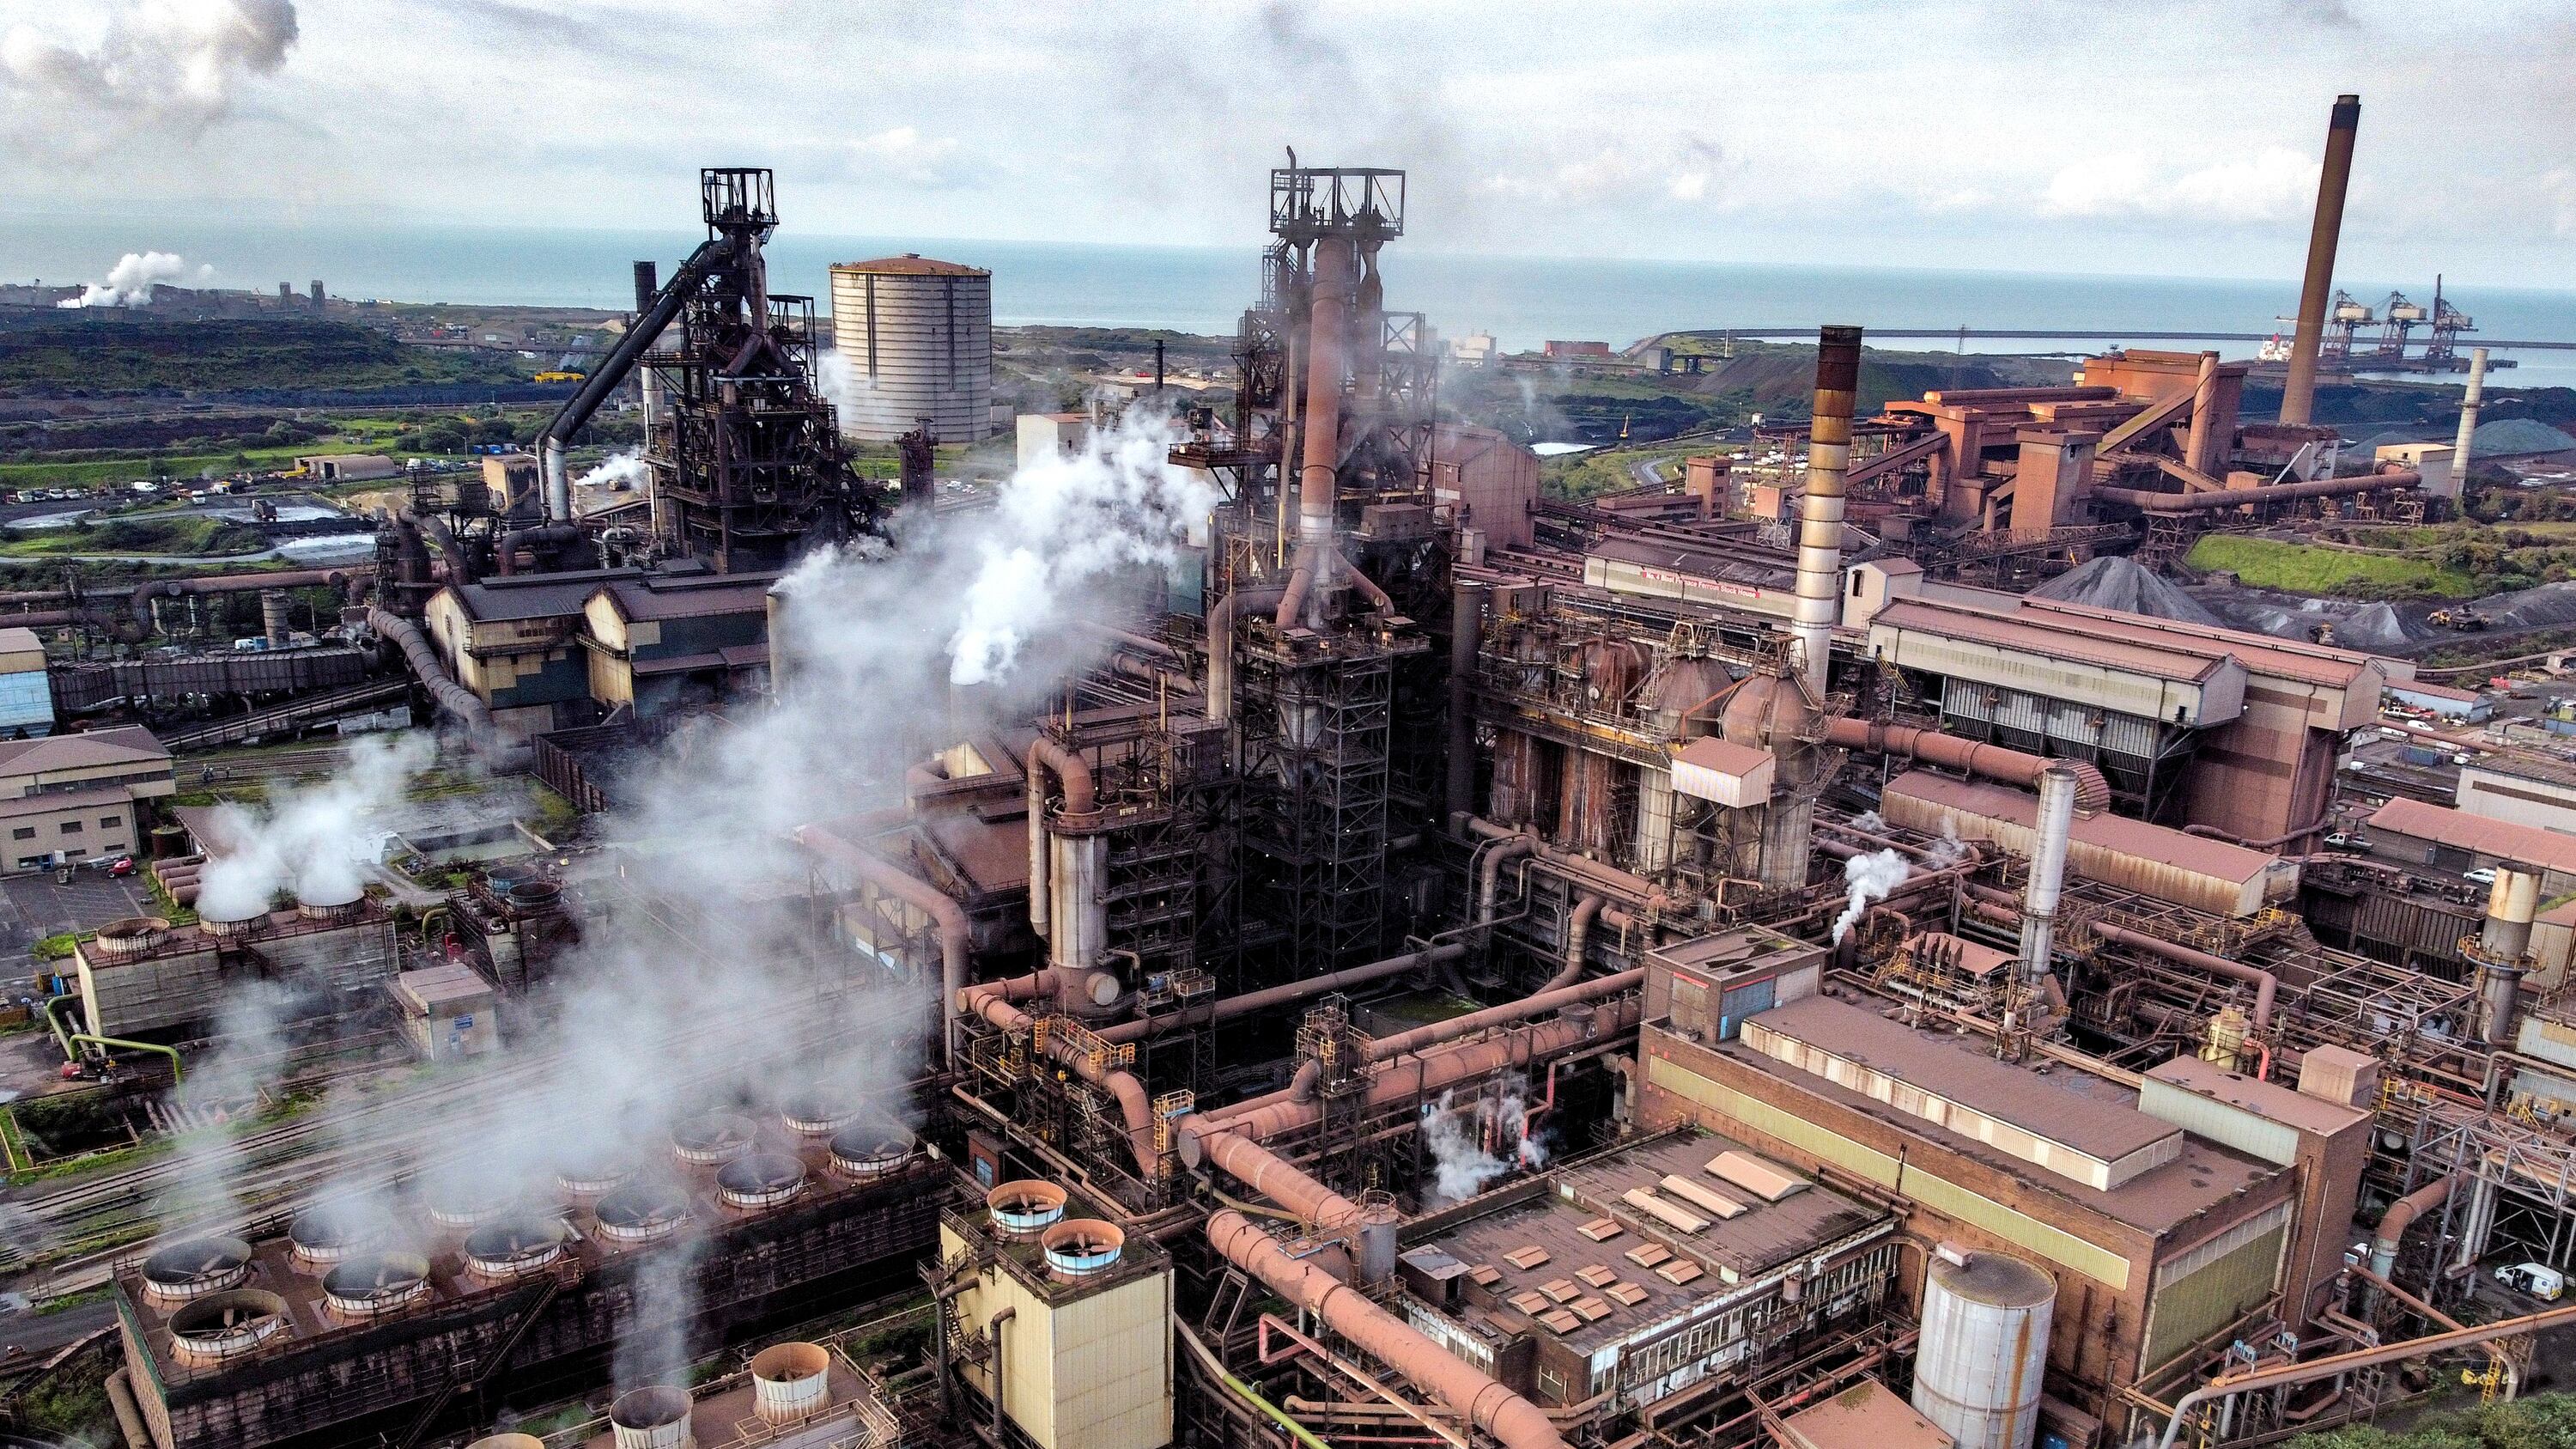 Tata Steel has said it will continue with plans to shut off the blast furnaces at its Port Talbot plant in the coming months, costing thousands of jobs in South Wales